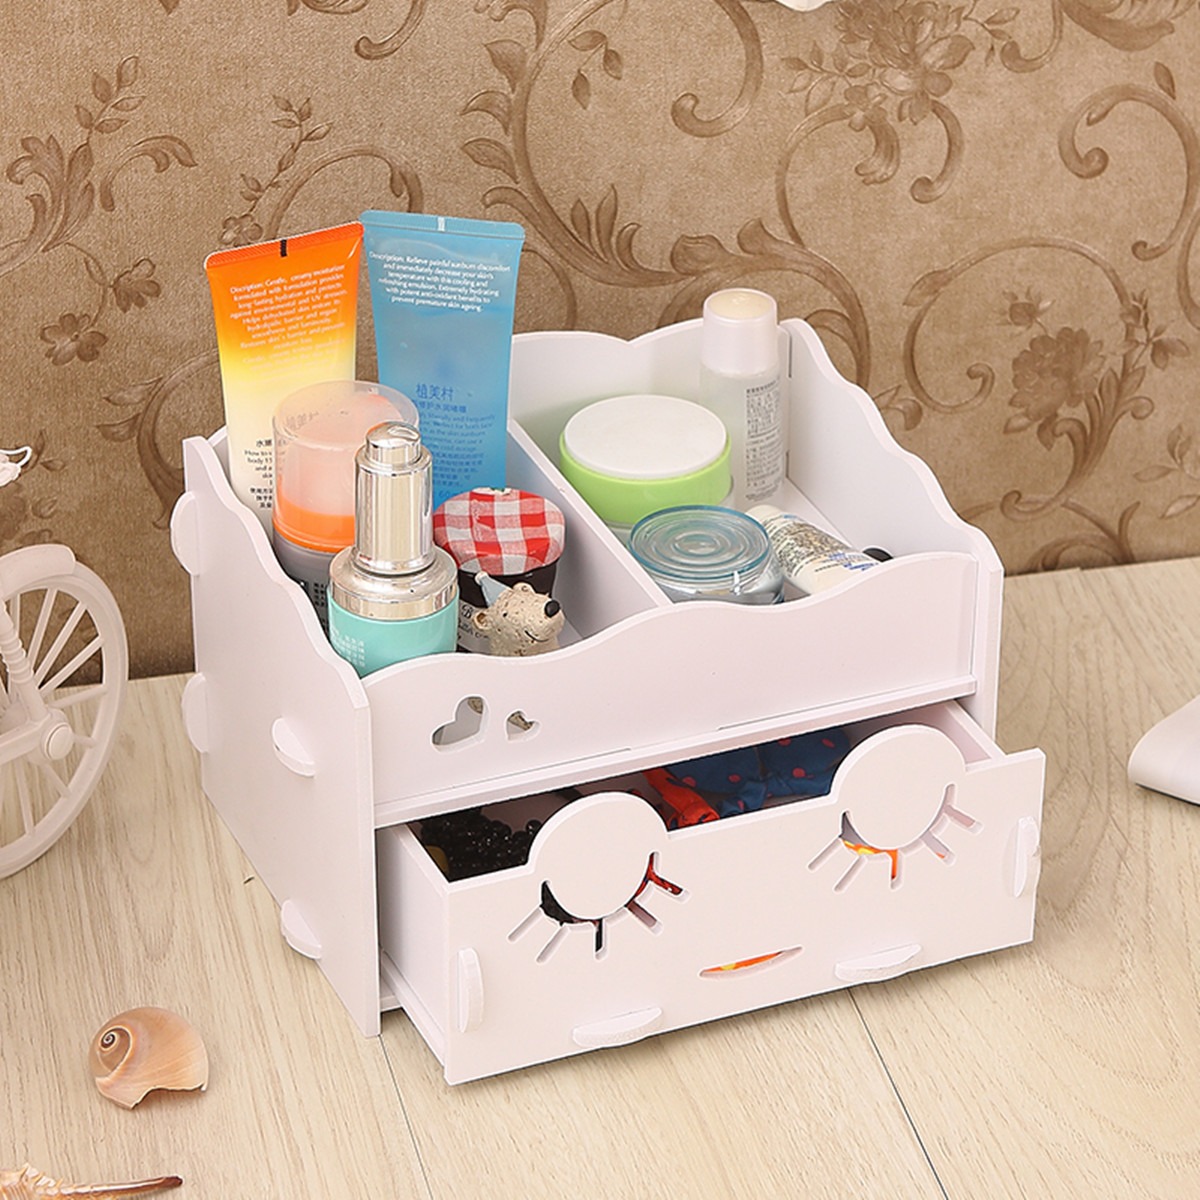 Smiling-Face-Cute-Wooden-White-Makeup-Organizer-Neat-Table-Collecting-Case-Cosmetics-Tools-1123232-1